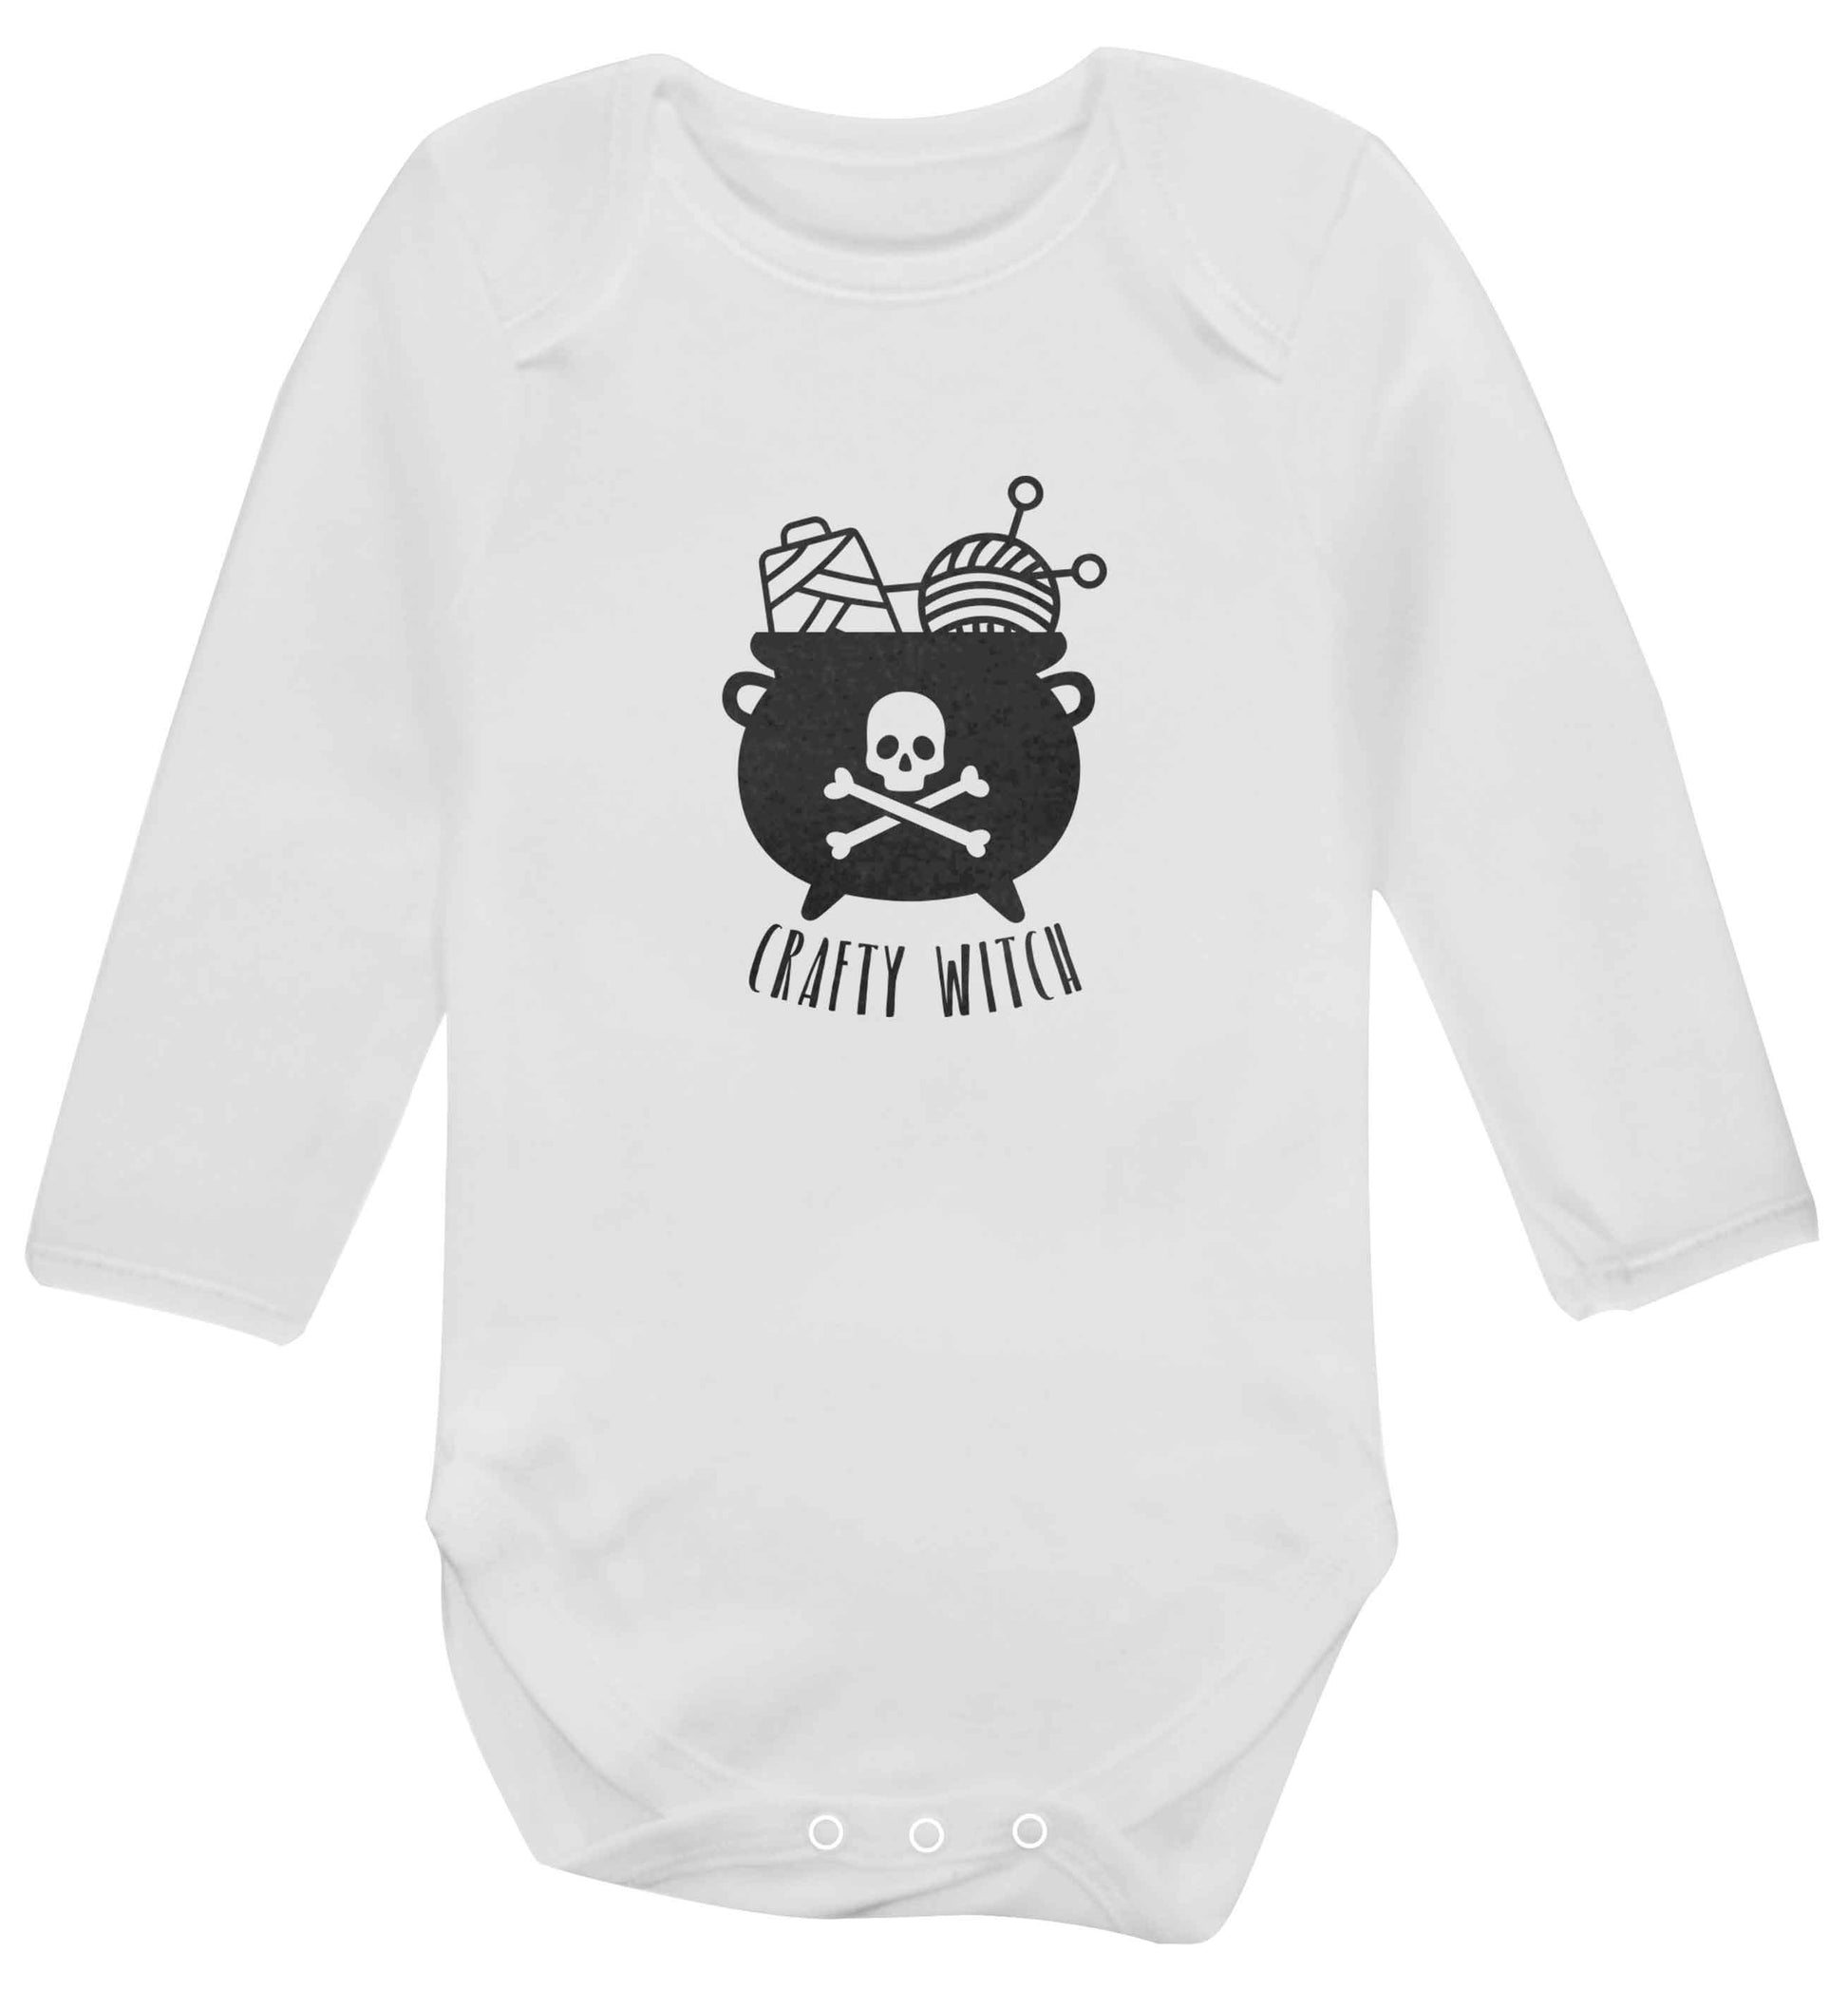 Crafty witch baby vest long sleeved white 6-12 months